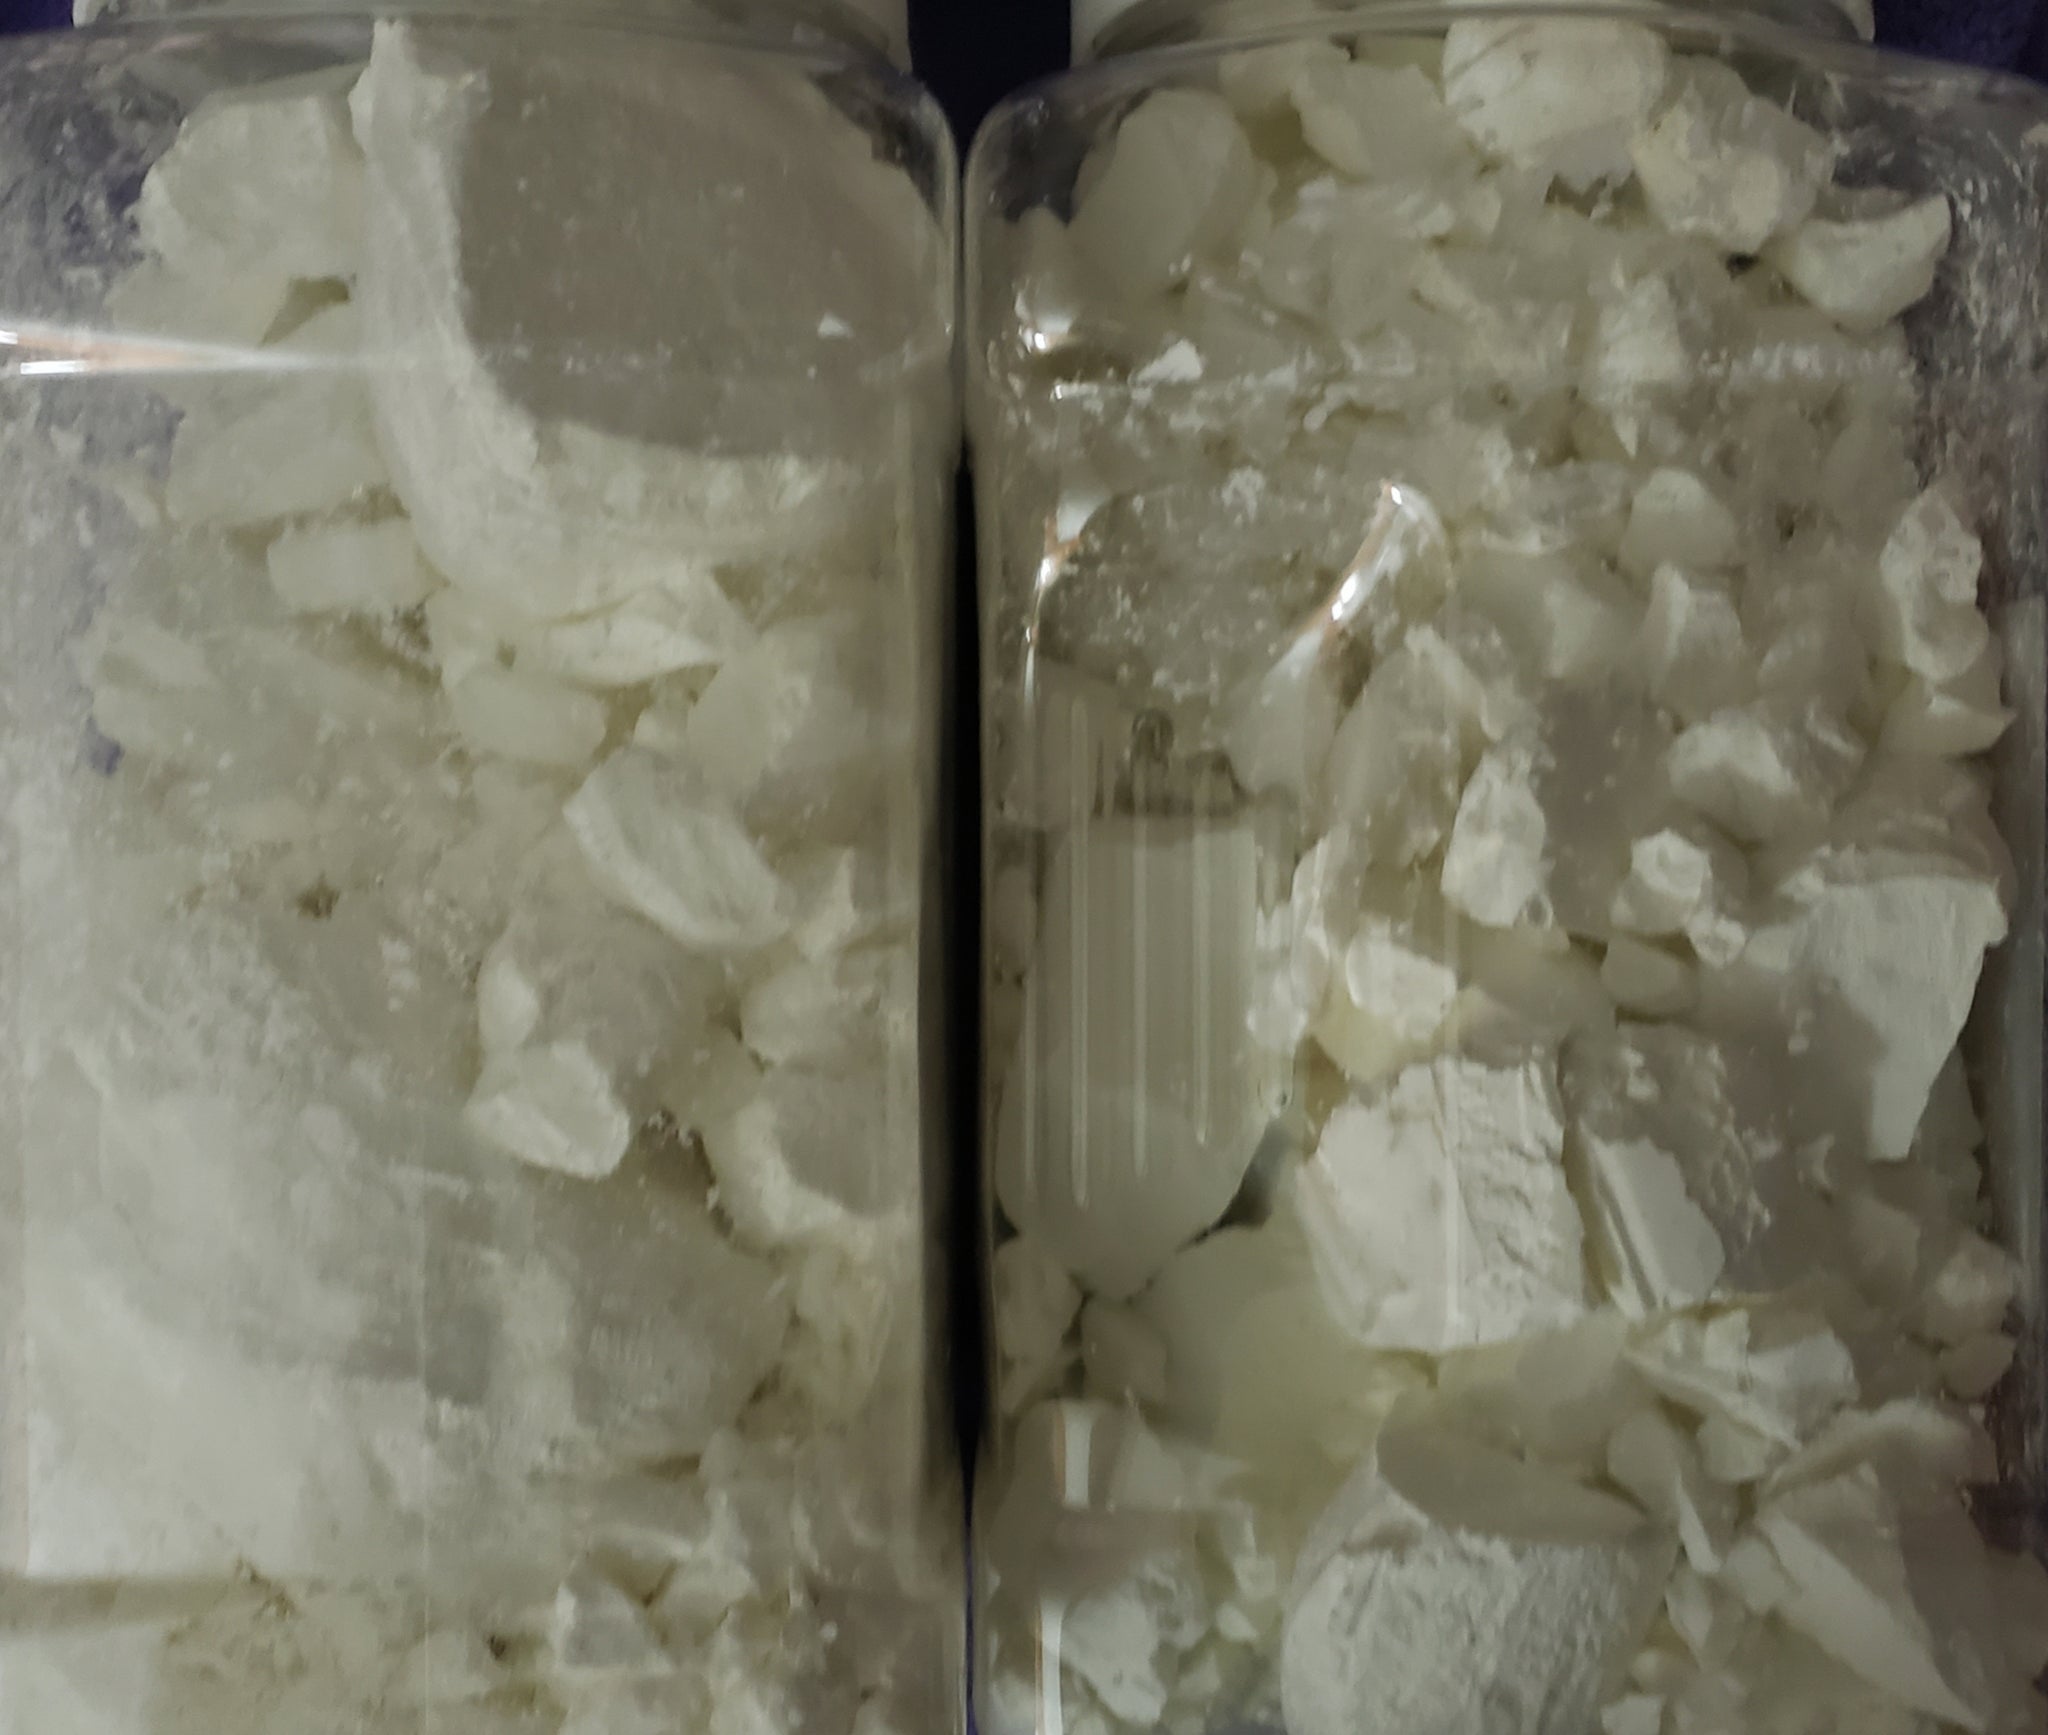 How to Make Cornstarch Chunks ⋆ Food Curation